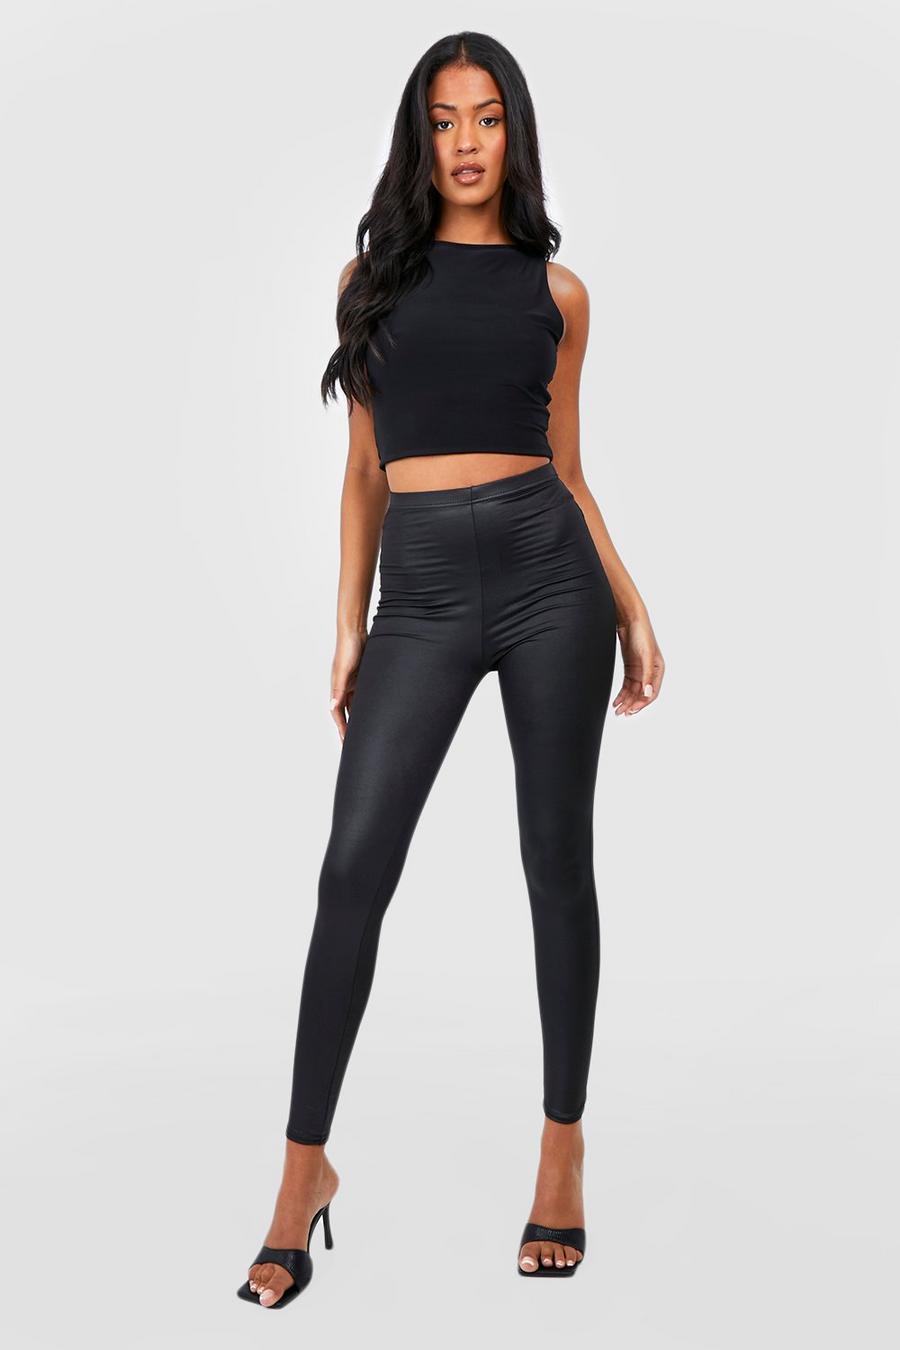 Black Tall Leather Look High Waisted Leggings image number 1